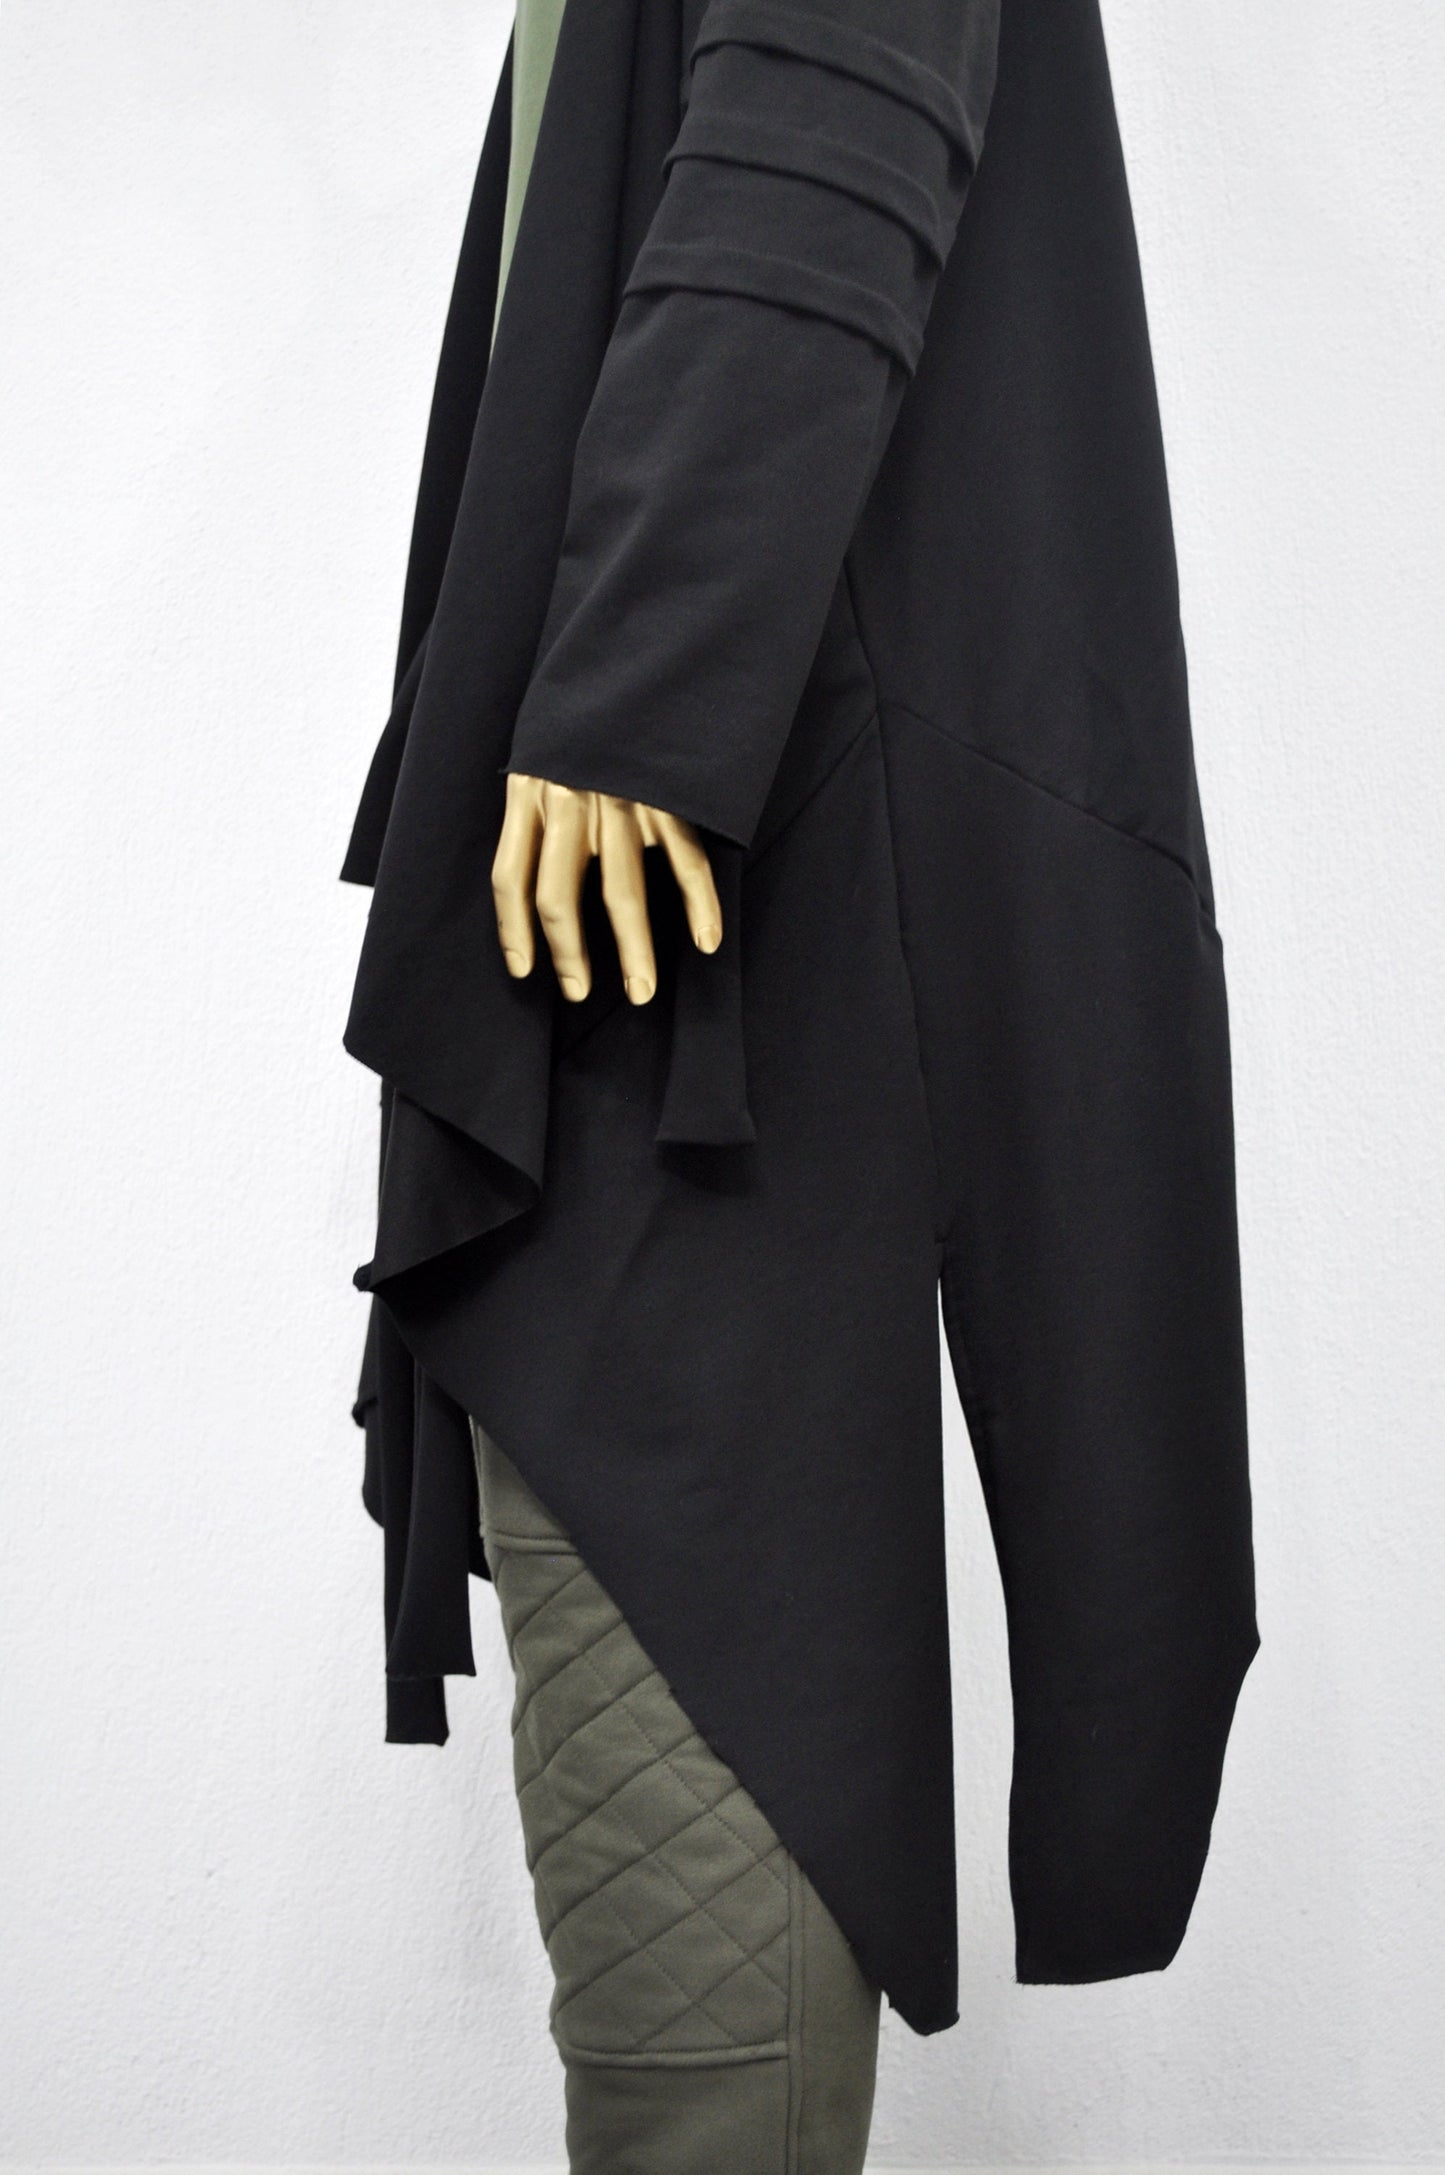 XS-8XL Asymetrical Wrap Cardigan Kimono Coat, Maxi Long Jacket Tunic, Oversized Loose Top,Goth Cyber Quilted SteamPunk Futuristic Post-BB161